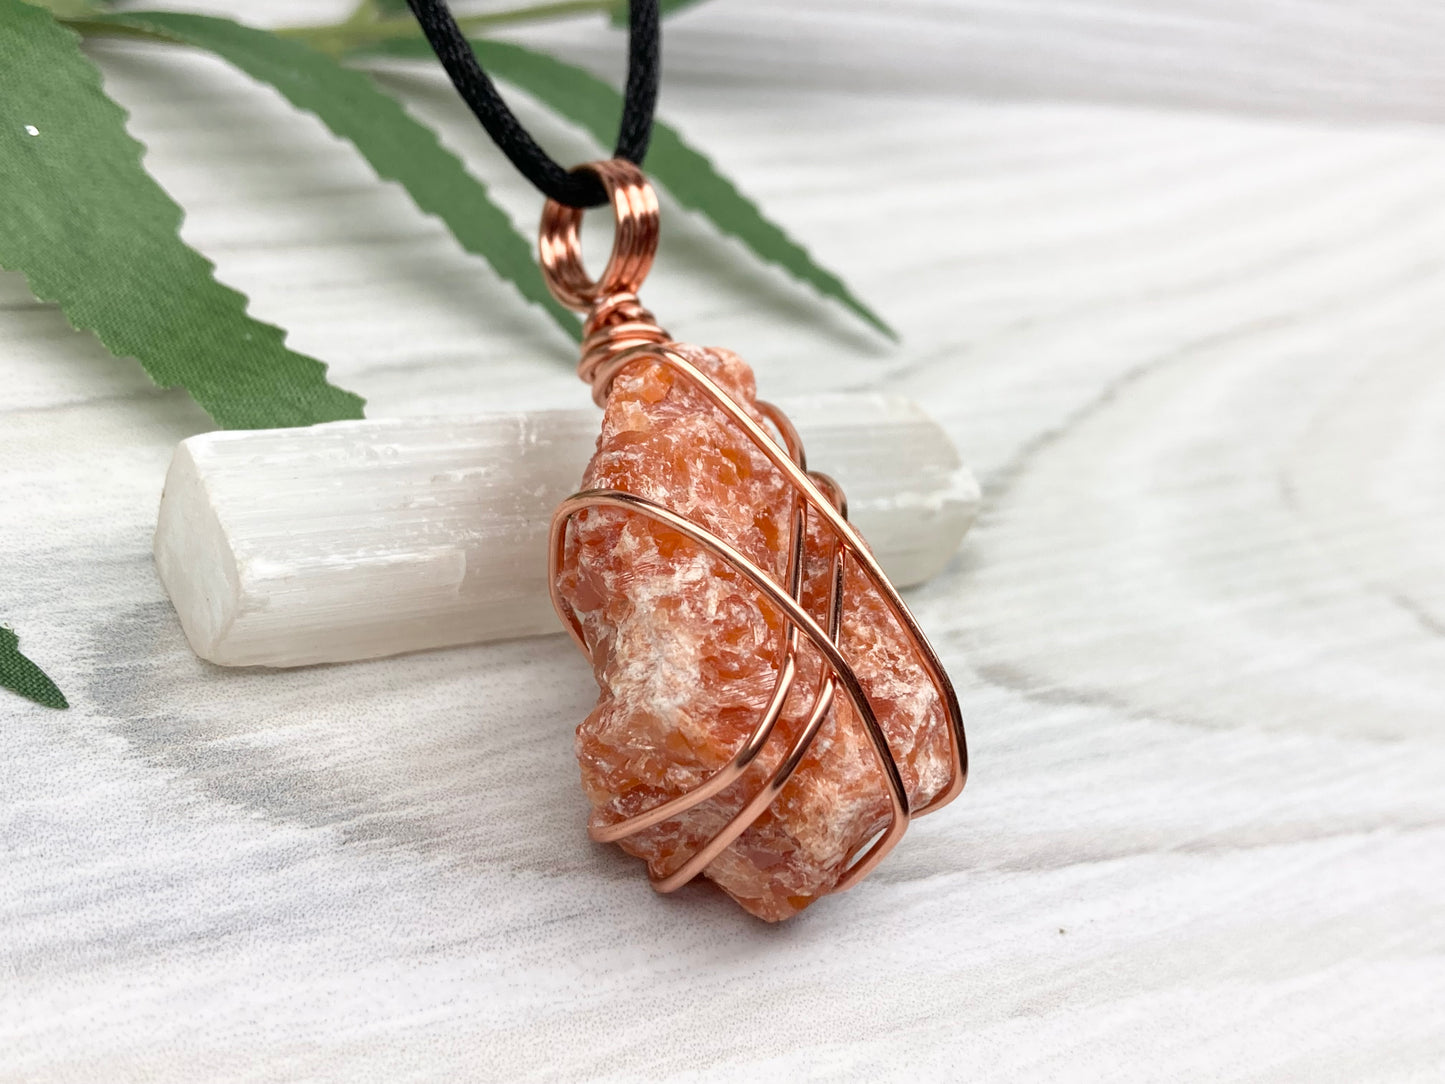 Raw Orange Calcite Necklace. Natural Orange Crystal Hand Wrapped With Copper Wire. Comes On A Black Chain. Leo Zodiac Stone Pendant. New Age Metaphysical Jewelry. Fire Element Gemstone.